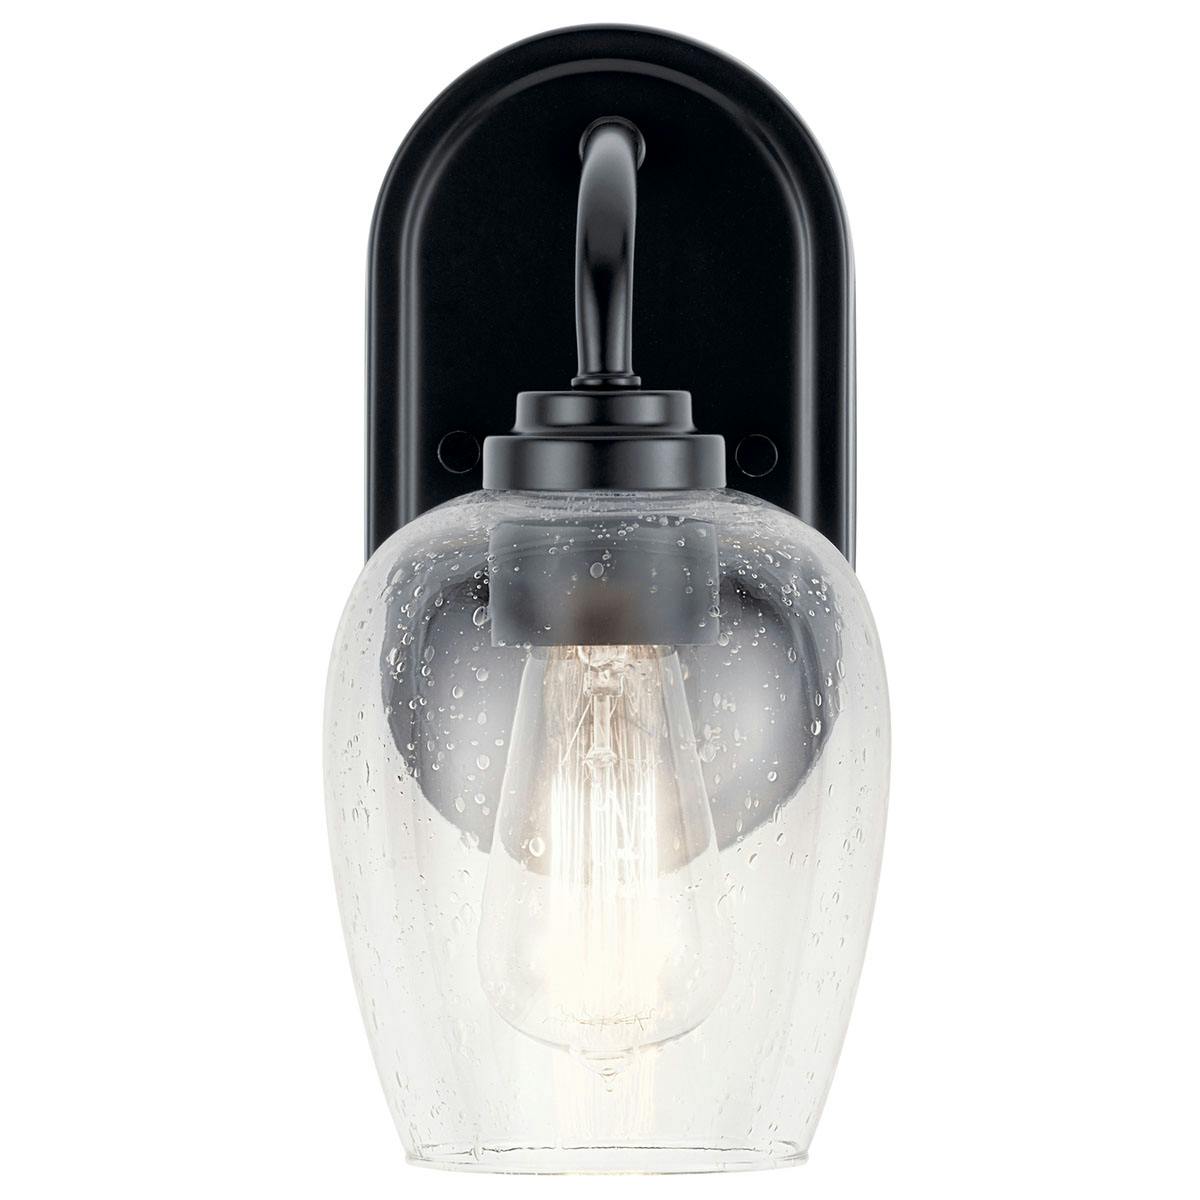 The Valserrano 10 inch Sconce 1 Light Black facing down on a white background